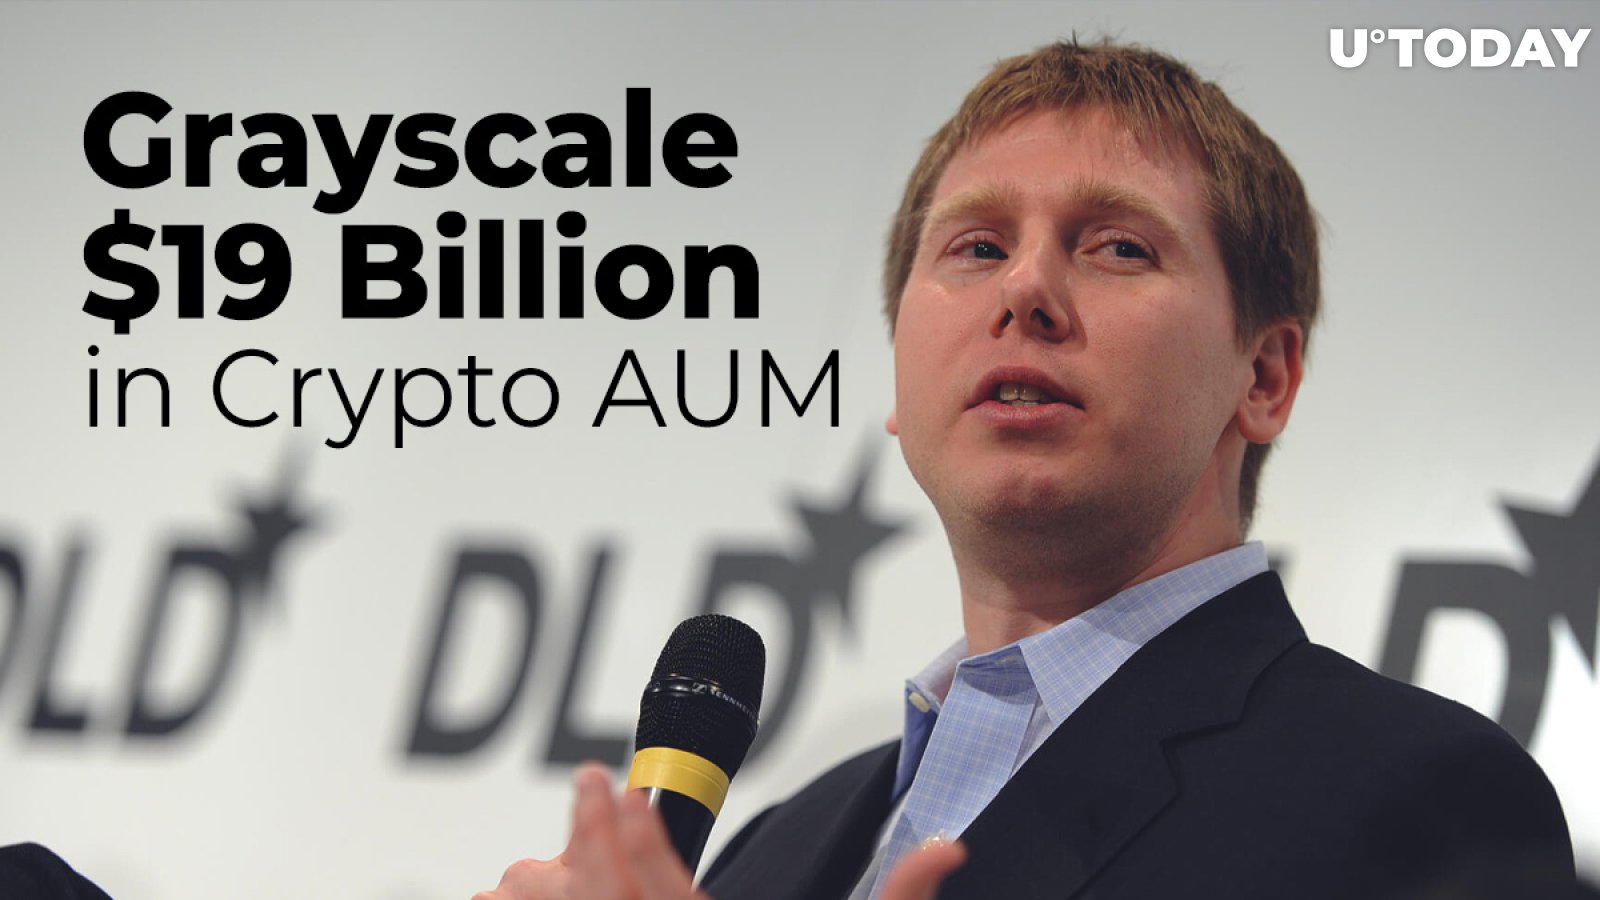 u.s sevurities and exchange commisions acceptance of crypto barry silbert